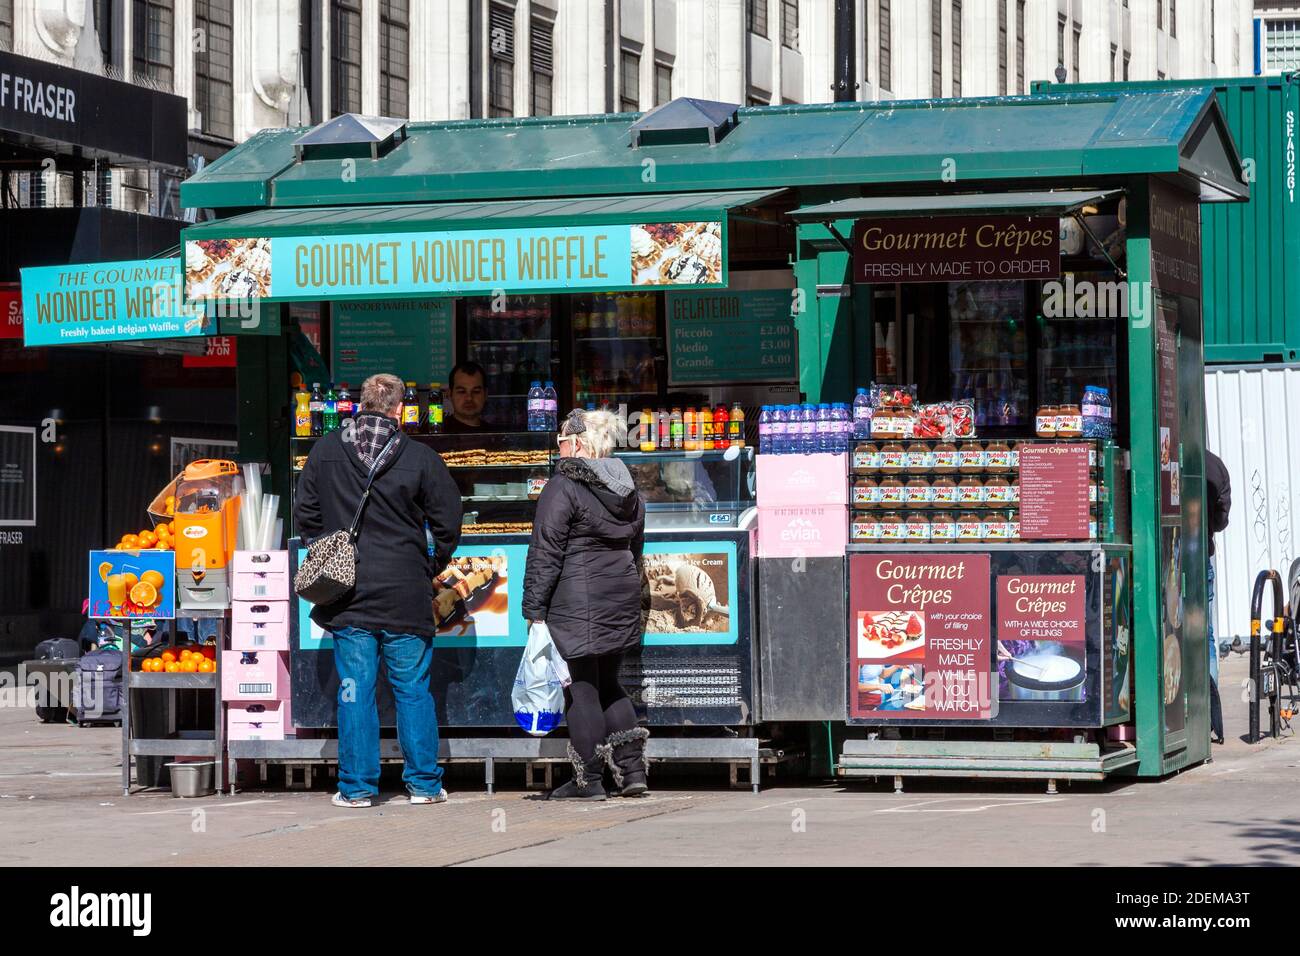 London, UK, April 1, 2012 : Tourist buying a Belgian waffle at a restaurant food street market stall also selling gourmet crepes and refreshments in t Stock Photo